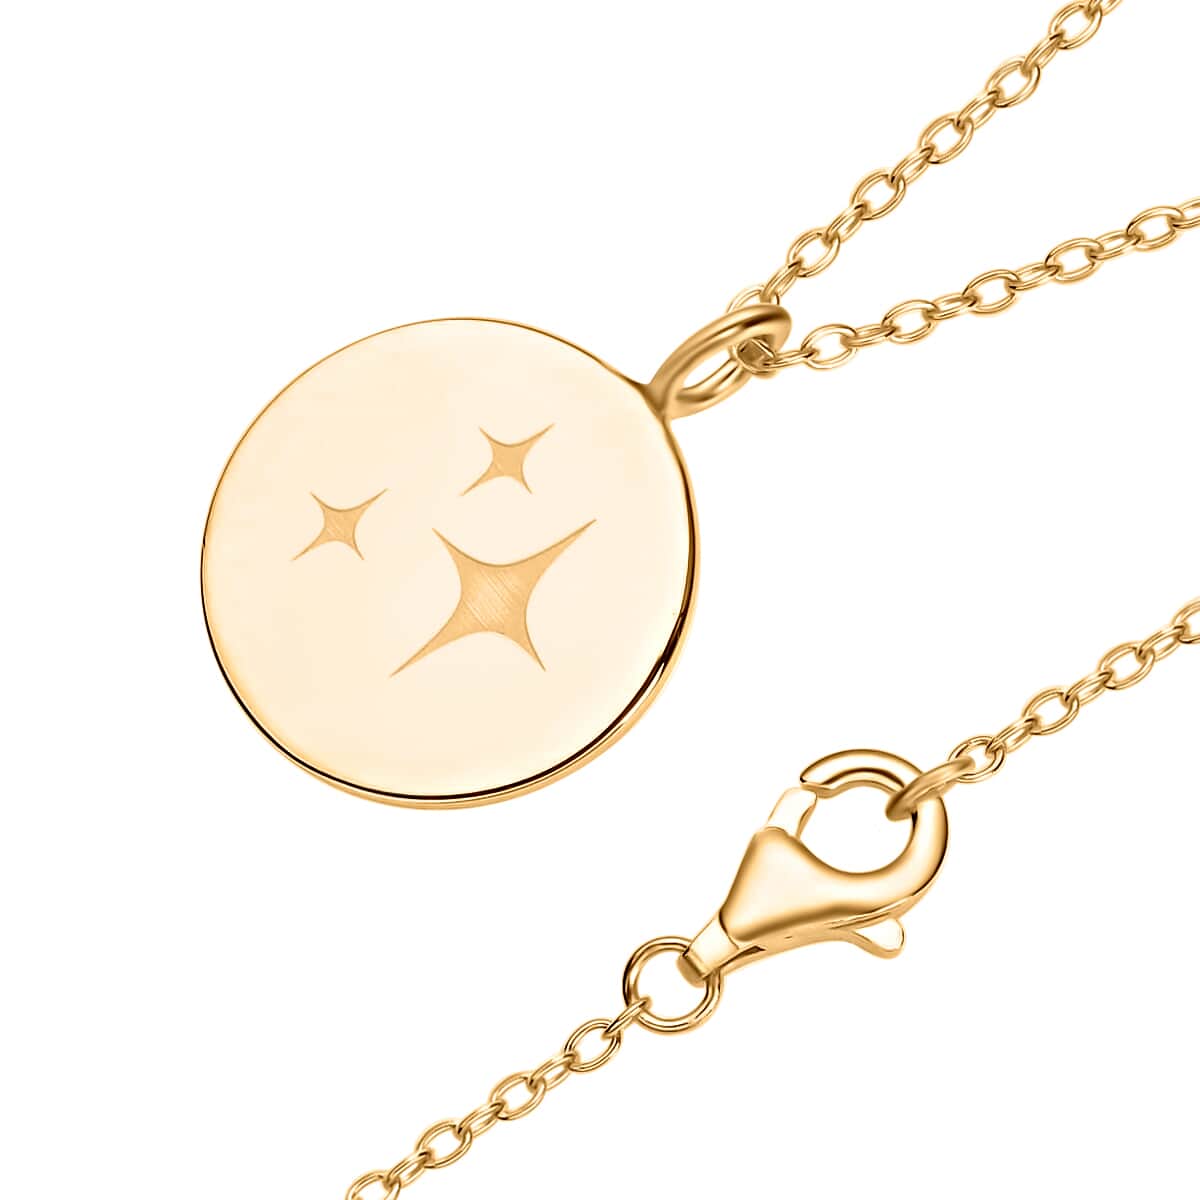 Star Sign Pendant Necklace, 16-18 Inch Adjustable Necklace, 14K Yellow Gold Over Sterling Silver Pendant Necklace 4.10 Grams image number 4